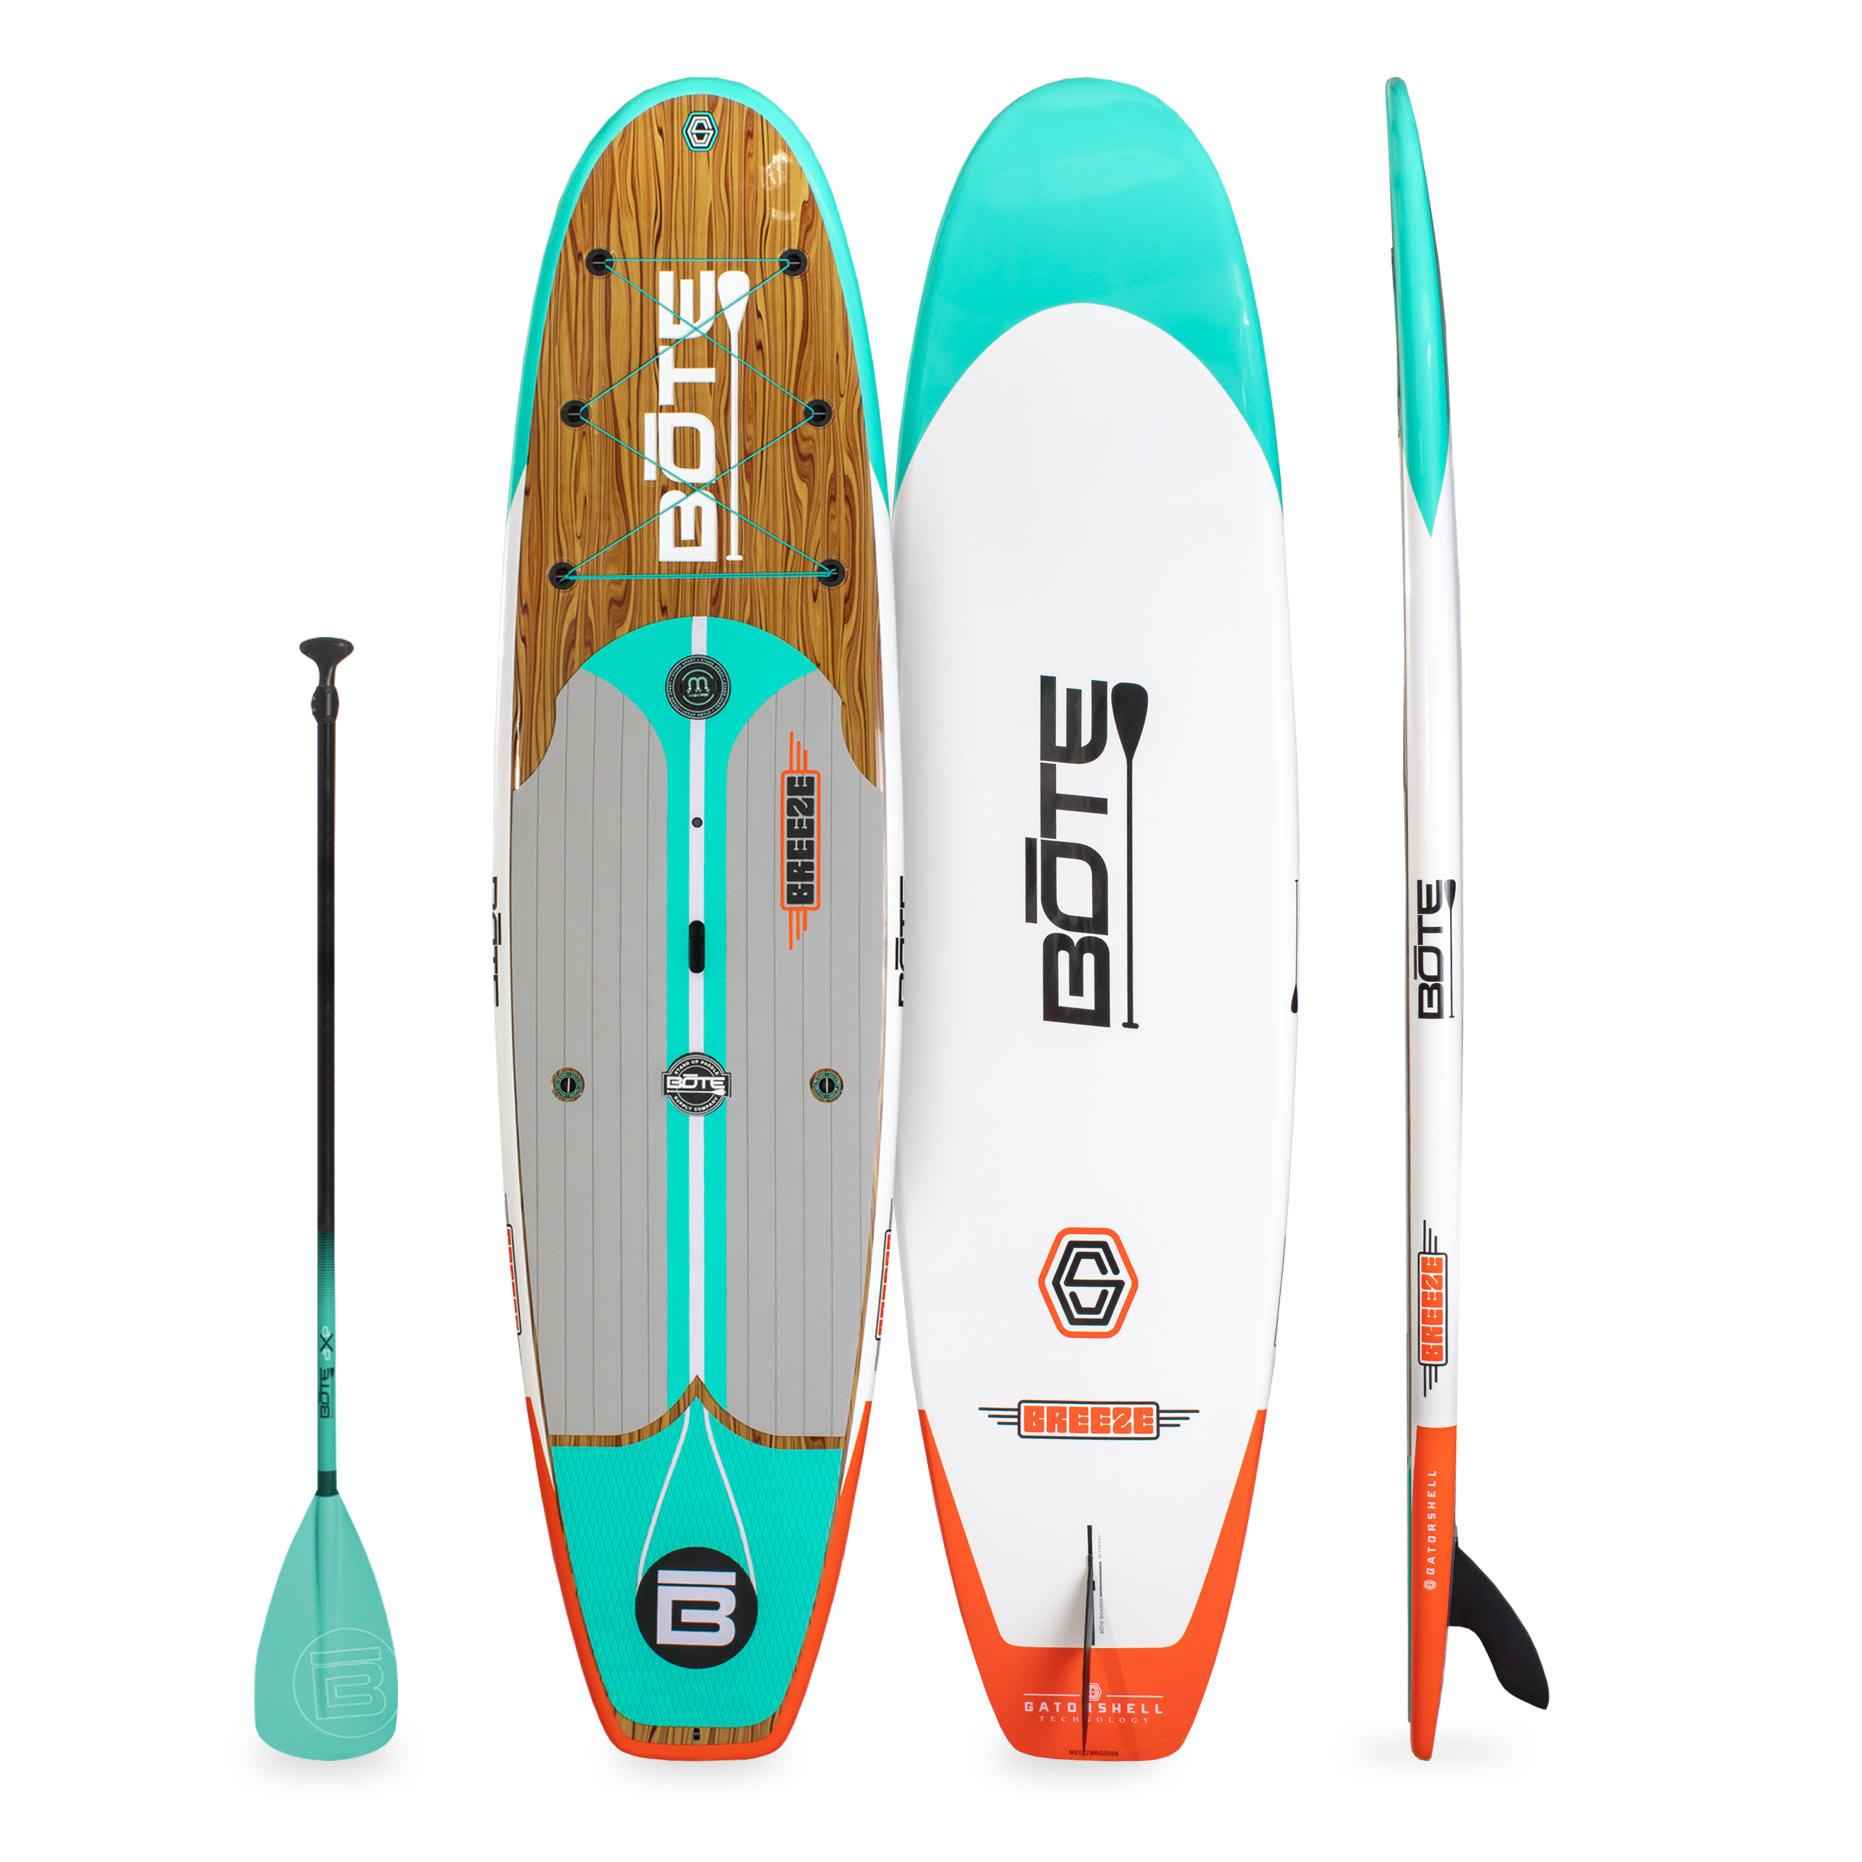 <p>We present our flagship of fun: the Breeze 10&prime;6&Prime;&nbsp; Gatorshell&mdash;designed for stability and ease, crafted for durability and style, wrapped in an affordable bow. The Breeze is the perfect platform for pure paddling. From beach to boat, lake to surf, you'd be hard-pressed to find a more fulfilling paddling experience.</p>
<p><strong>Technical Specs</strong>&nbsp;</p>
<ul>
<li><strong>Dimensions:</strong>&nbsp;10&prime;6&Prime; L &times; 32&Prime; W &times; 4.5&Prime; D</li>
<li><strong>Capacity:</strong>&nbsp;230 LBS</li>
<li><strong>Avg. Weight:</strong>&nbsp;31 LBS</li>
<li><strong>Construction:</strong>&nbsp;Gatorshell Technology</li>
<li><strong>Travel Bag Dimensions:</strong>&nbsp;36&Prime; L &times; 17&Prime; W &times; 13&Prime; D</li>
<li><strong>Loaded Bag Weight:</strong>&nbsp;42 LBS</li>
</ul>
<p><em>If rider weight is within 50 LBS of a board's listed capacity, BOTE recommends upgrading to a larger capacity board.</em></p>